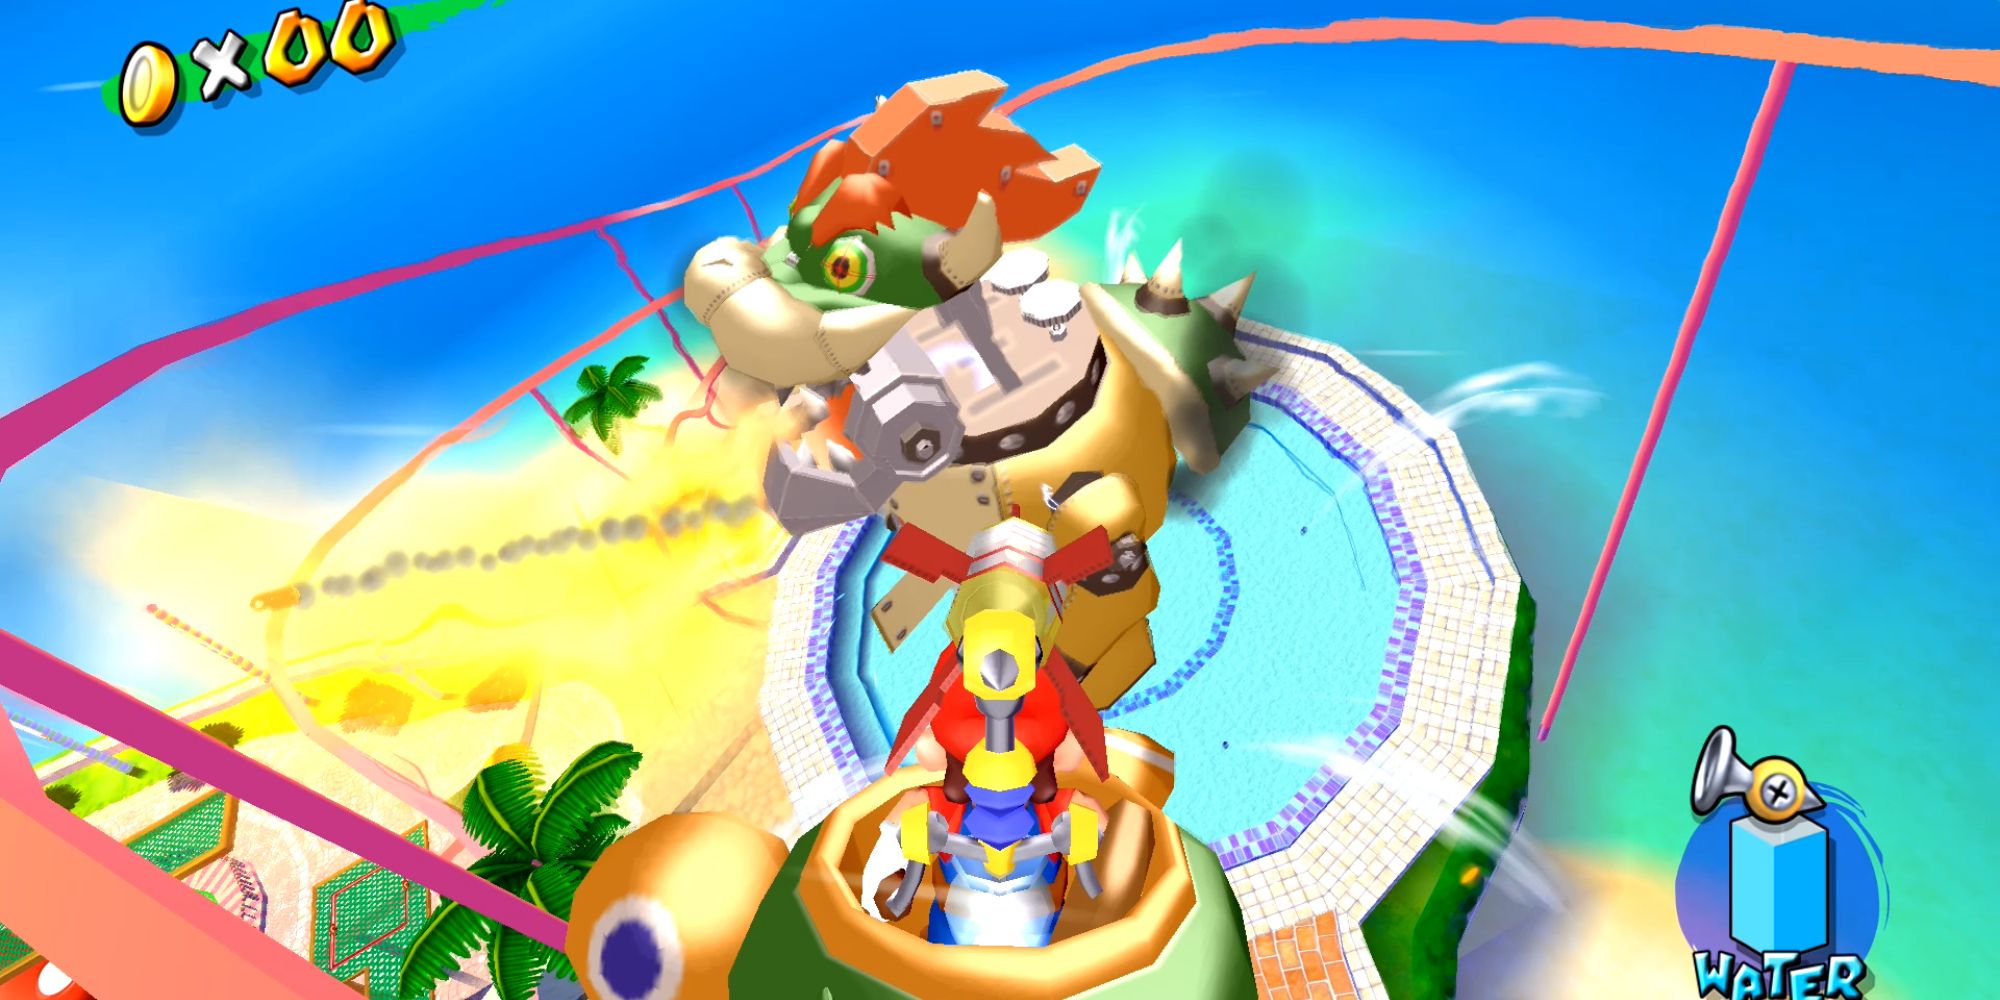 Mario on a rollercoaster above Mecha-Bowser